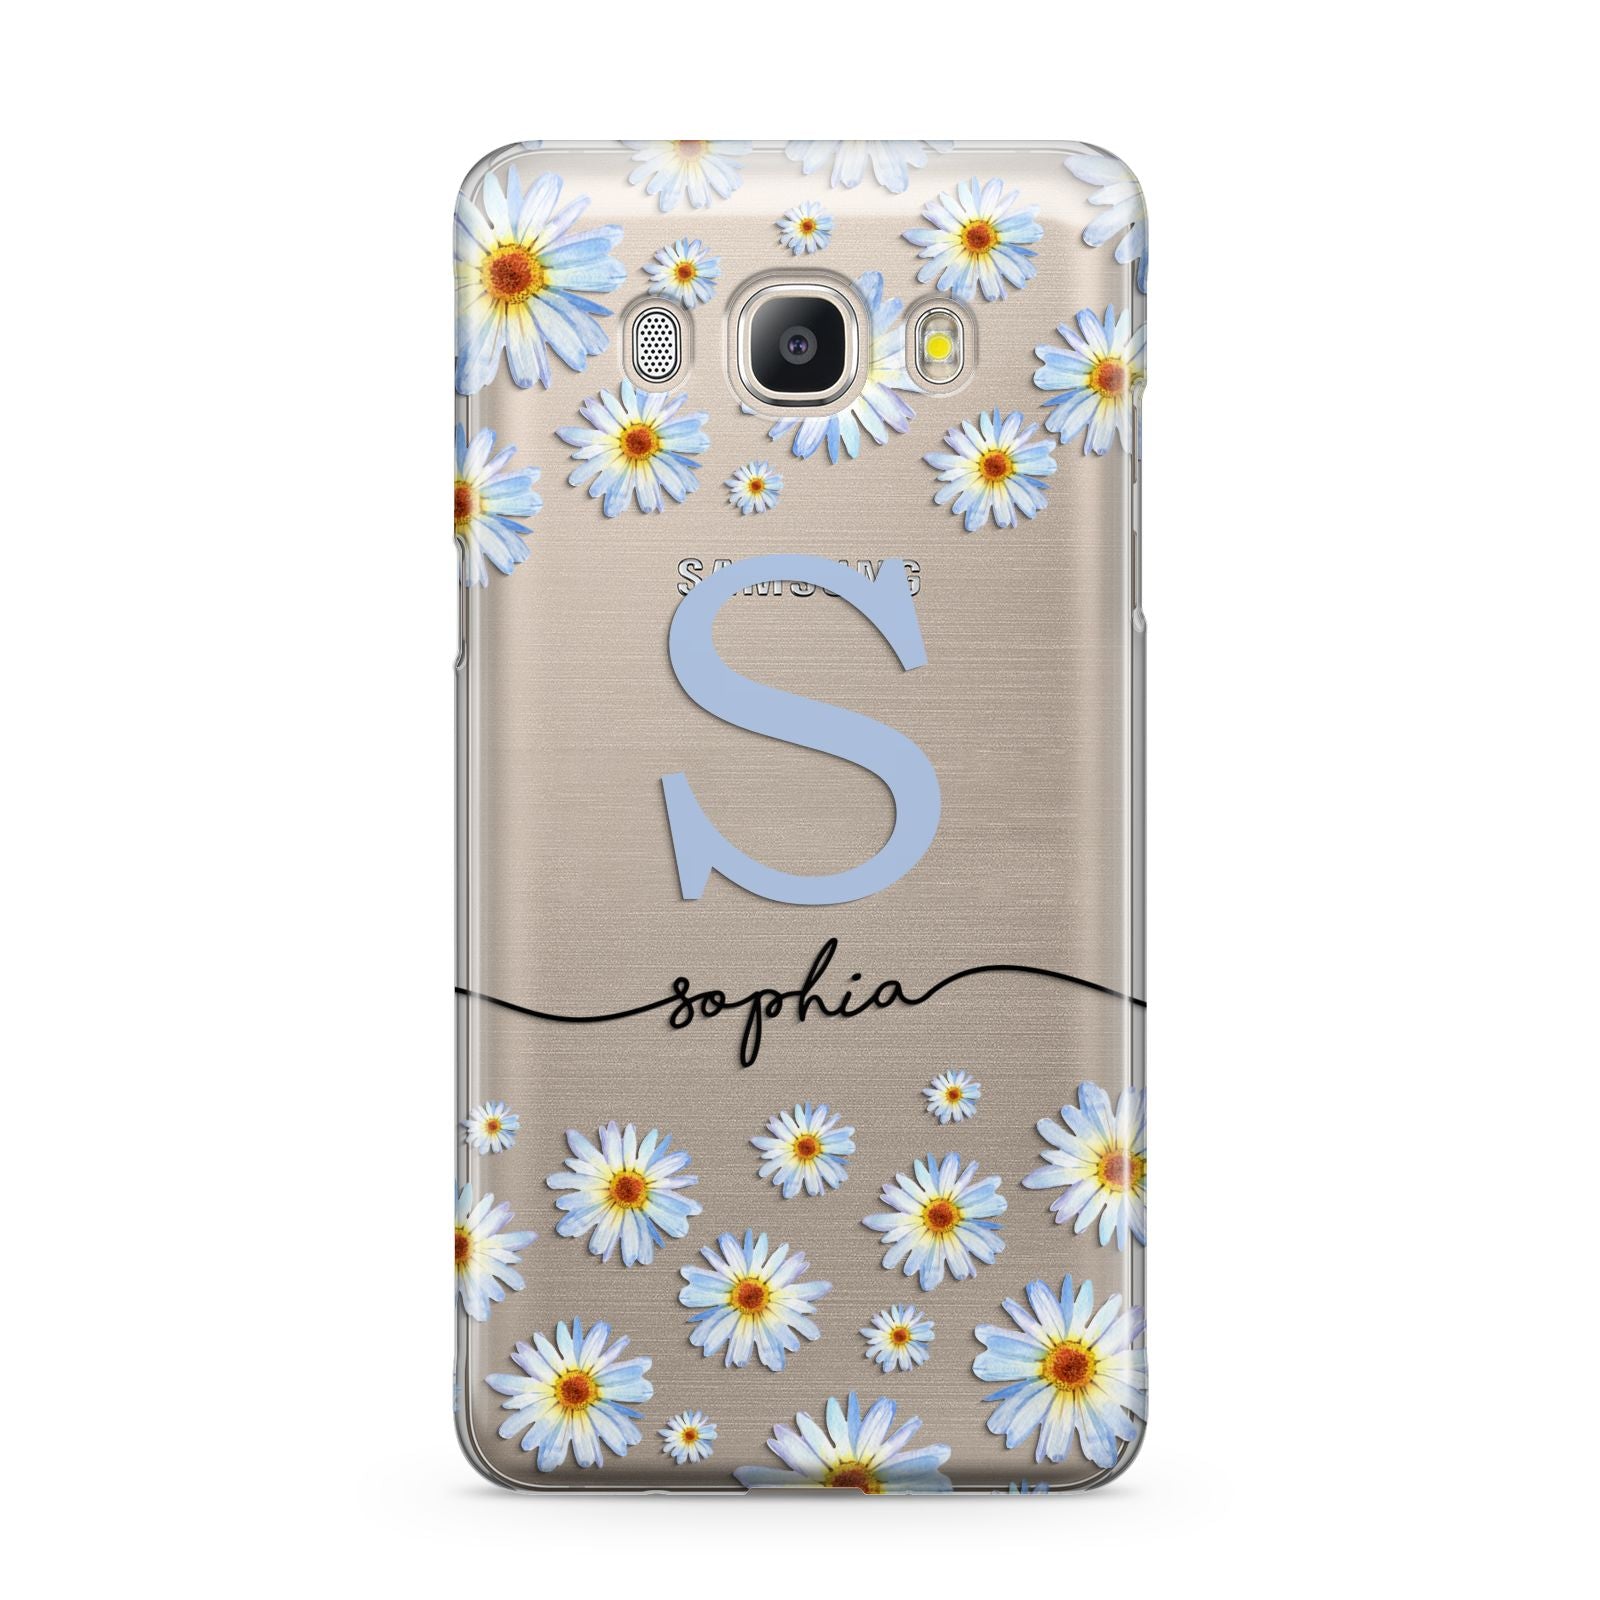 Personalised Daisy Initial Name Samsung Galaxy J5 2016 Case